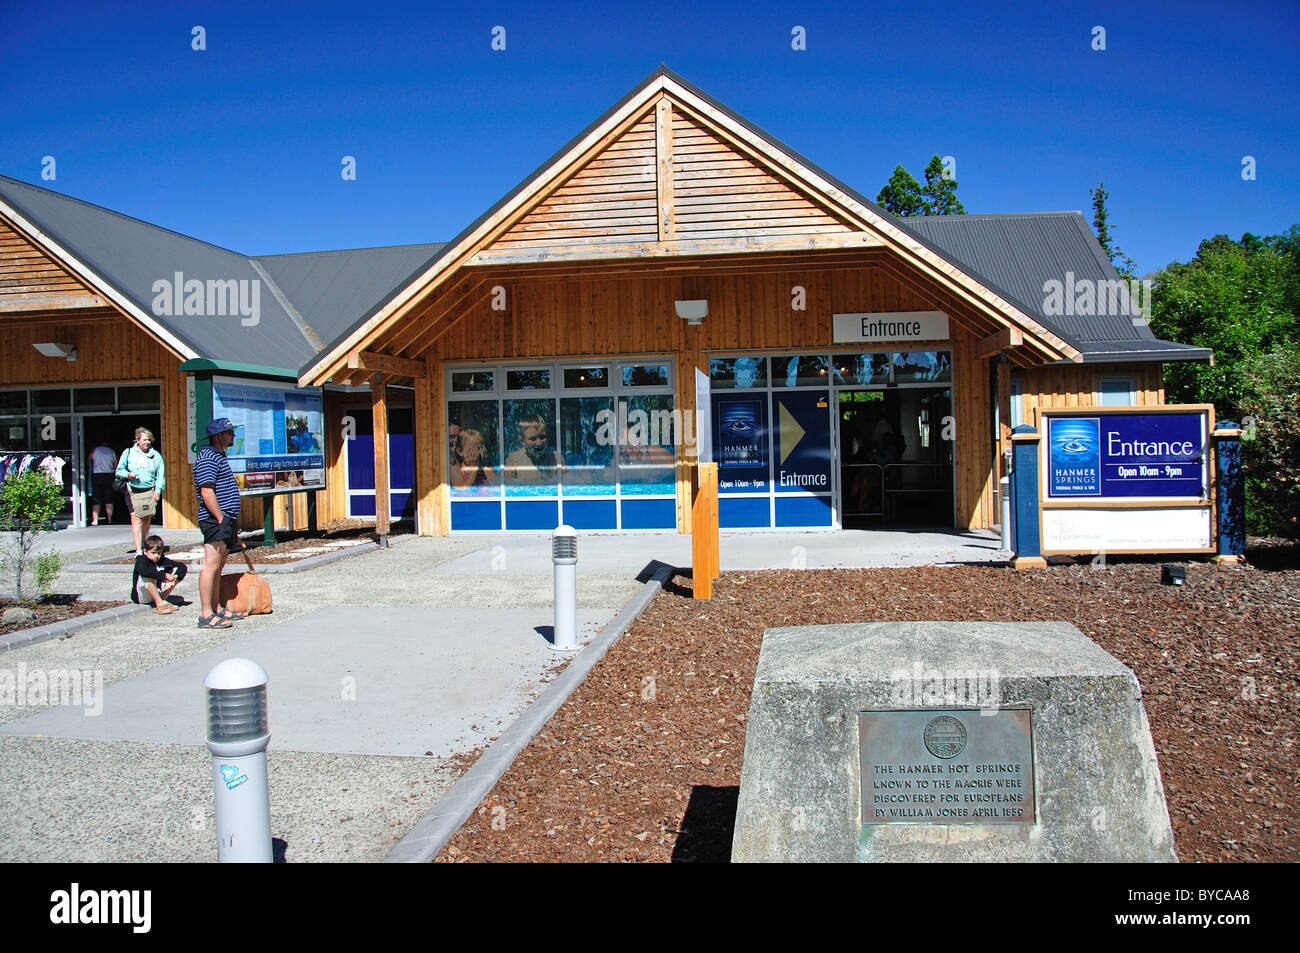 Entrance to Hanmer Springs Thermal Pools & Spa, Hanmer Springs, North Canterbury, Canterbury, South Island, New Zealand Stock Photo